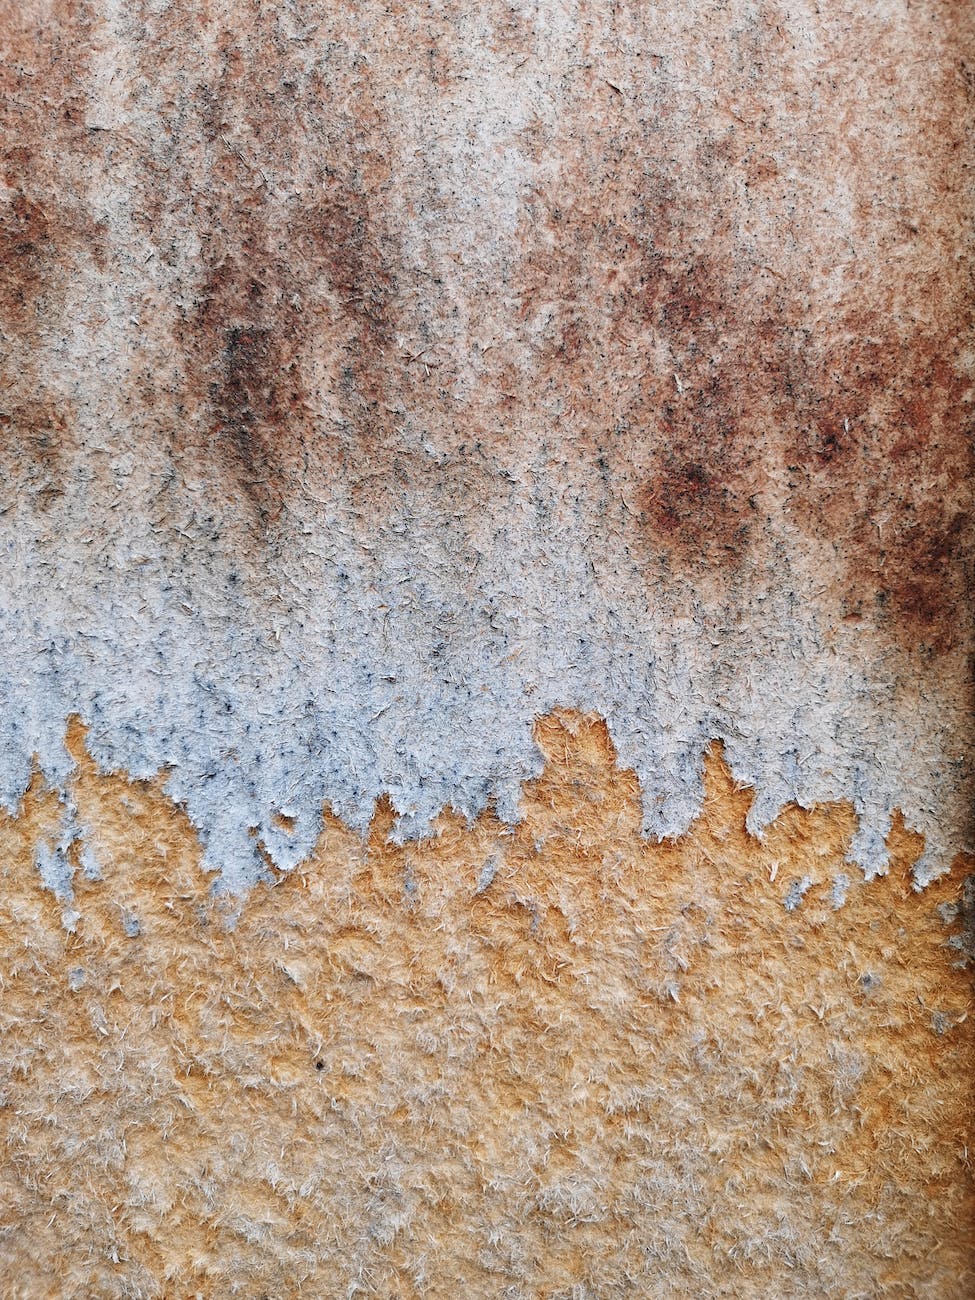 close up photo of dirty wood with paint peeling off